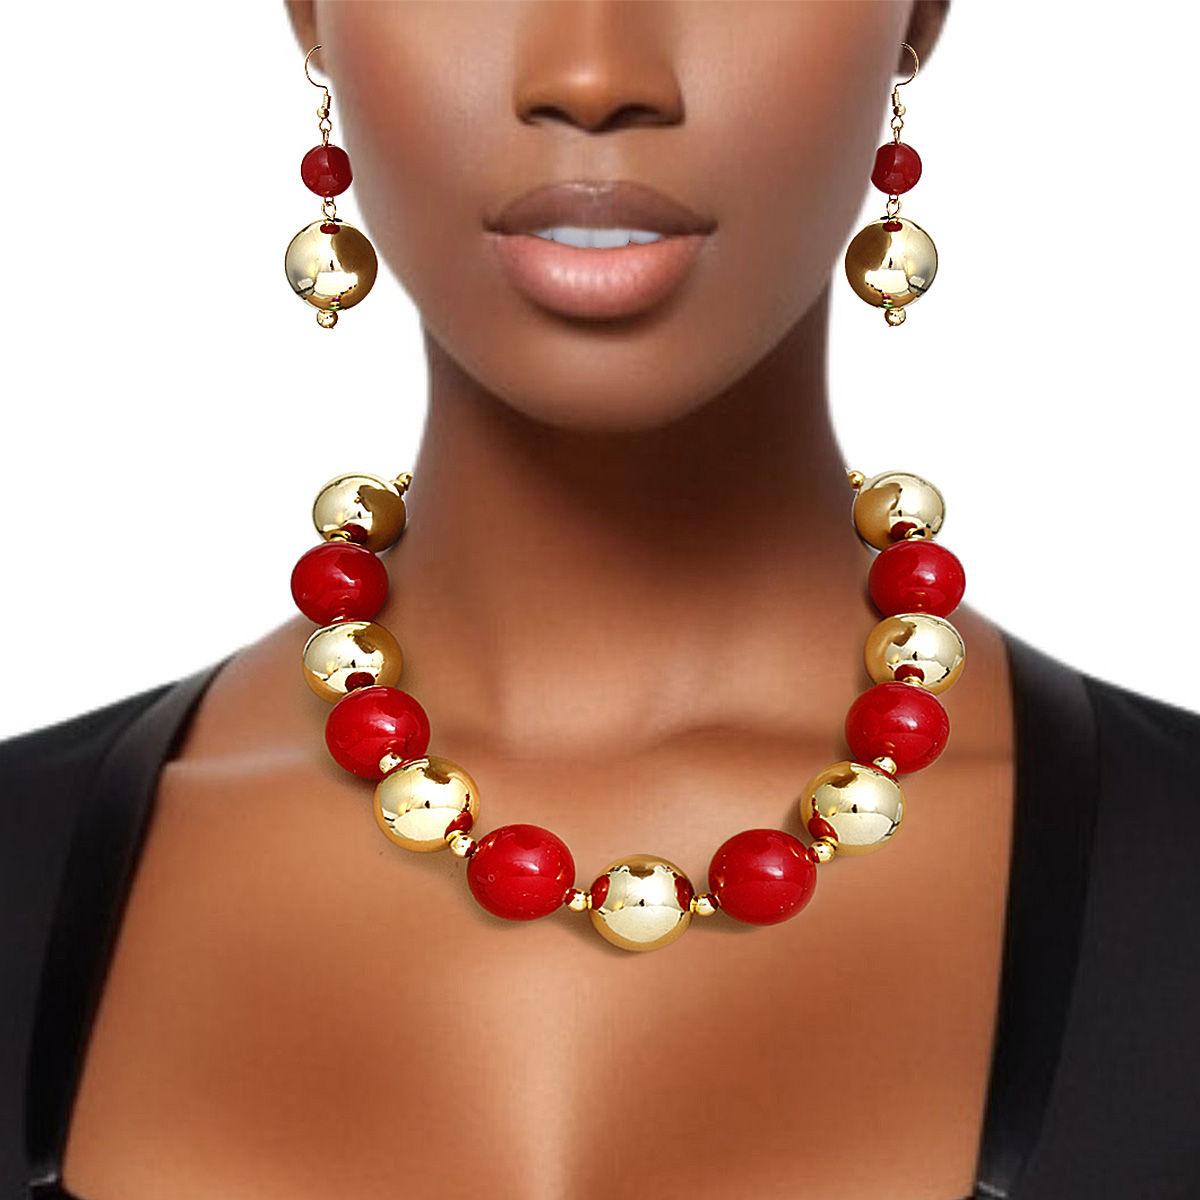 Bauble Pearl Red Gold Necklace Earrings Set - Level Up Your Fashion Jewelry Collection